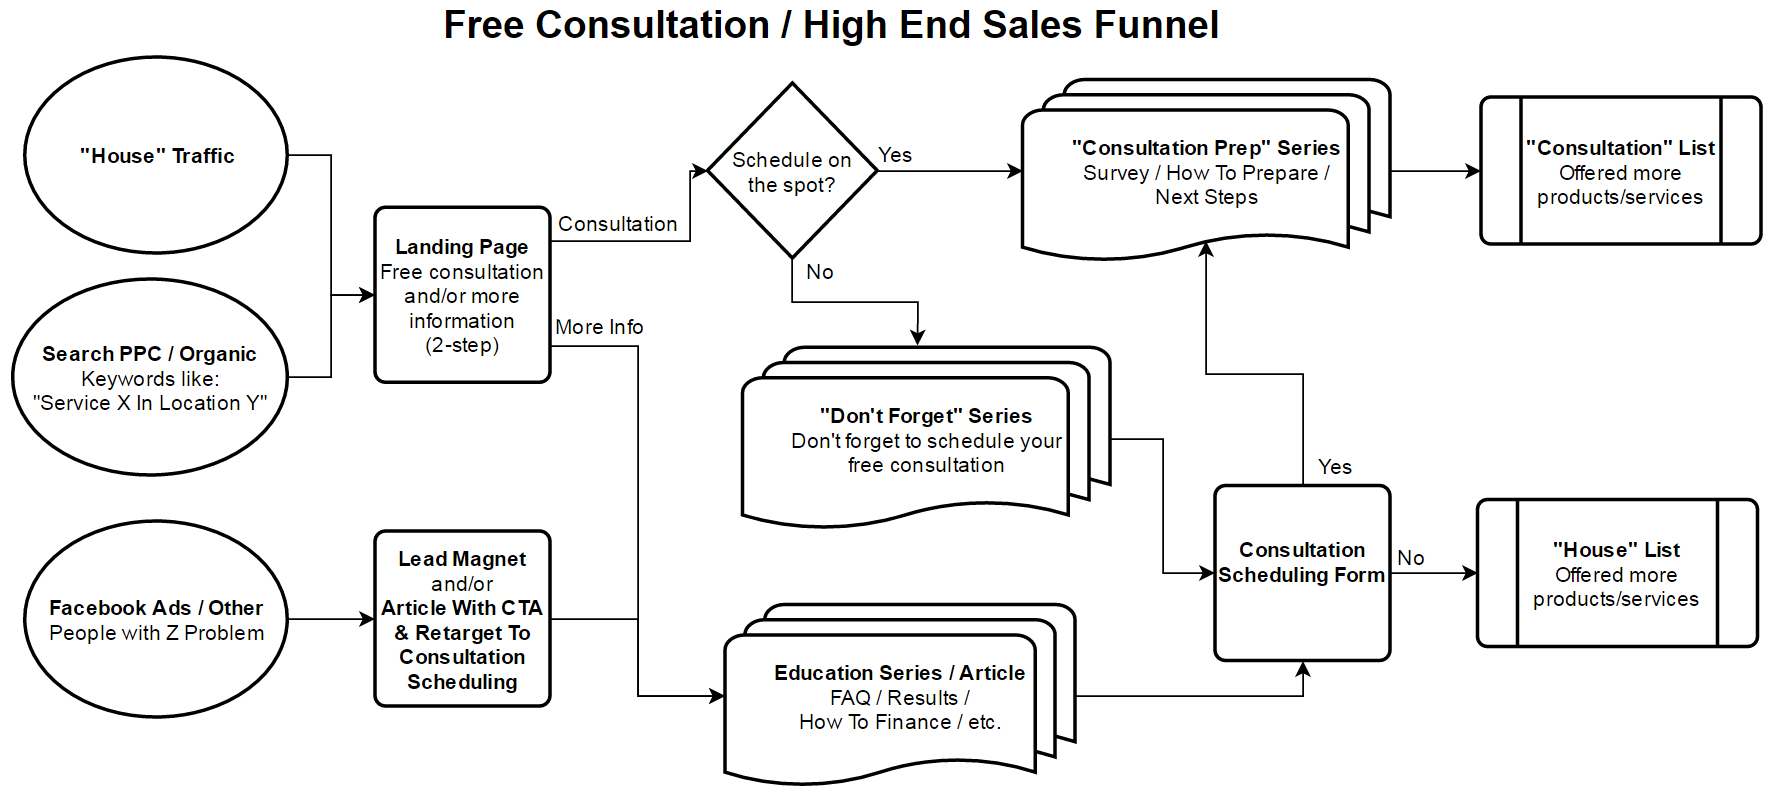 Free Consultation - High End Sales Funnel